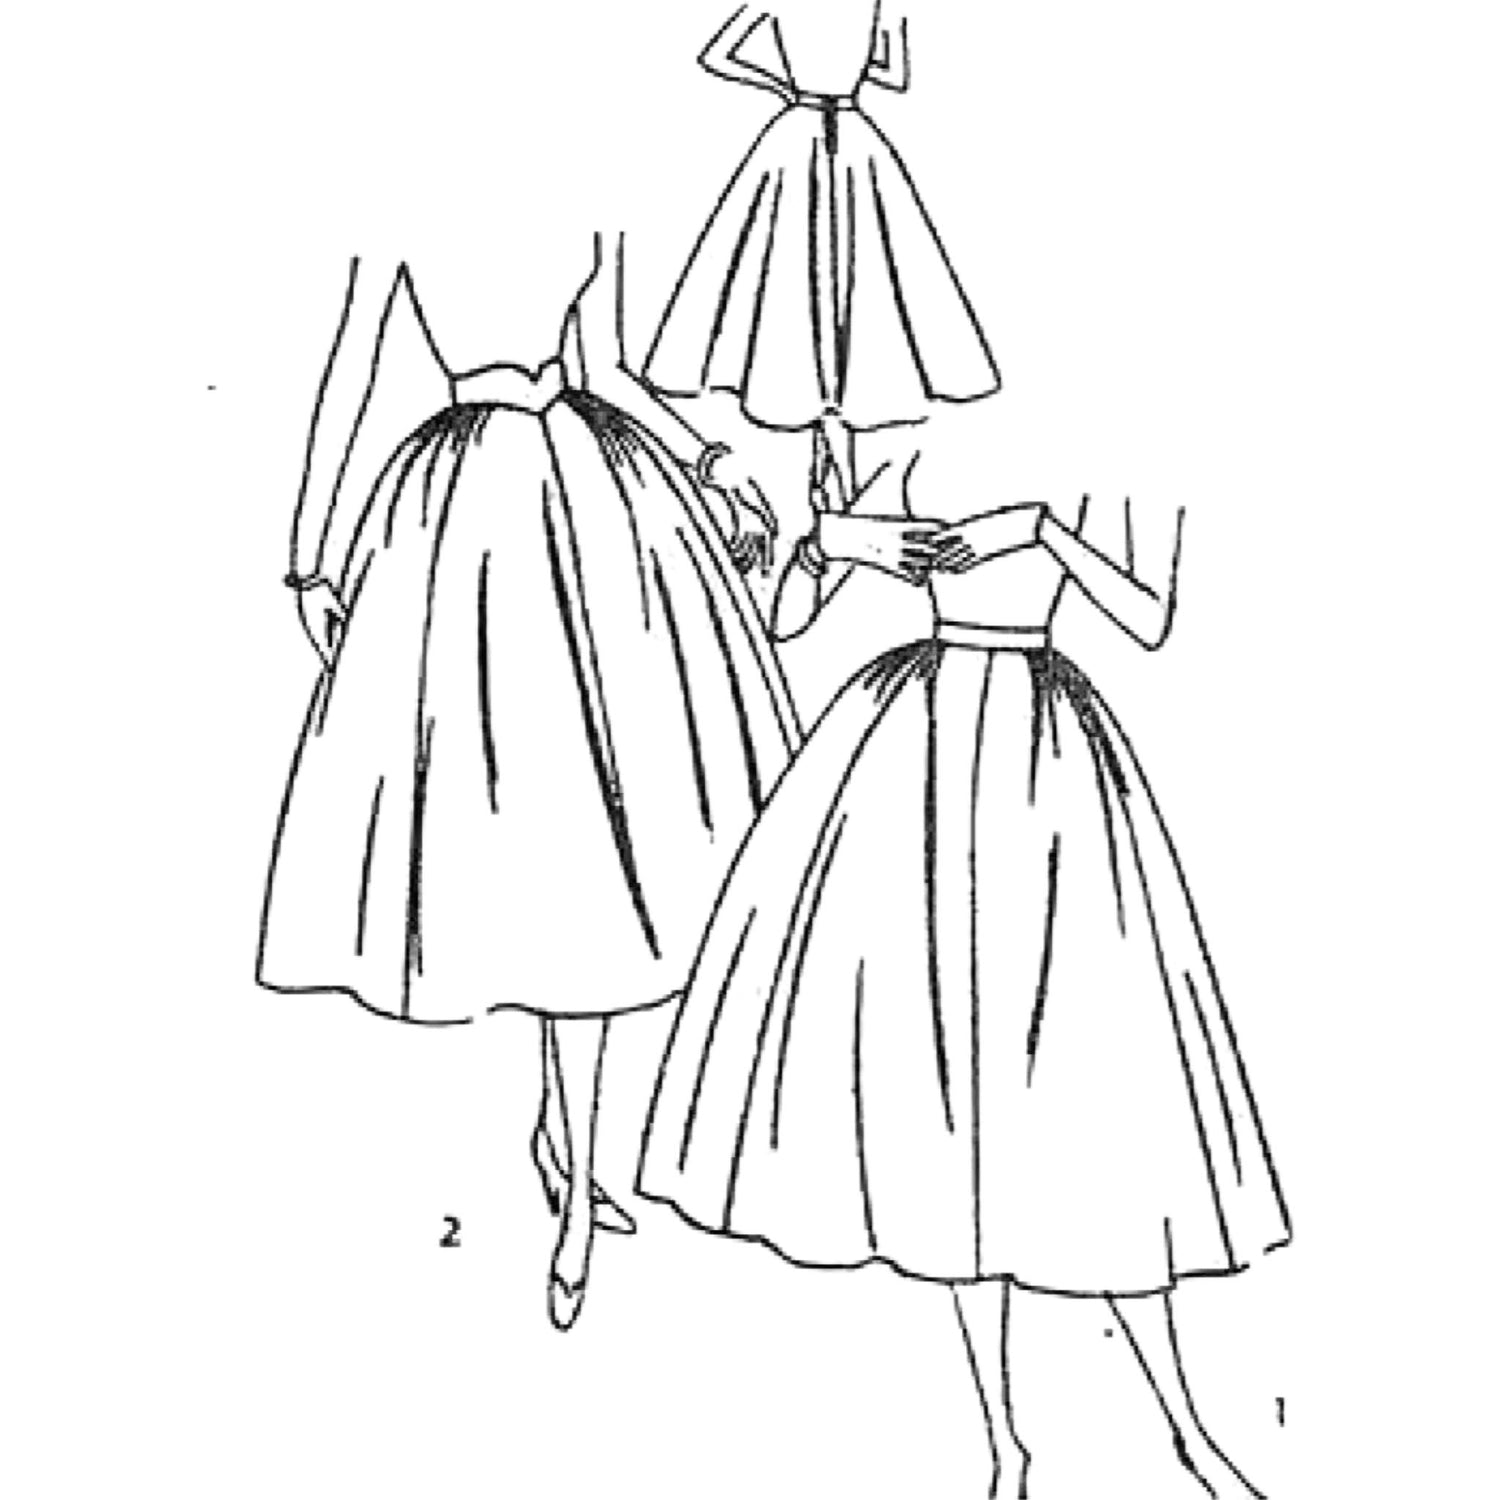 1950s Pattern, Full Circle Skirt, Swing, Rockabilly - lined drawings of skirtss